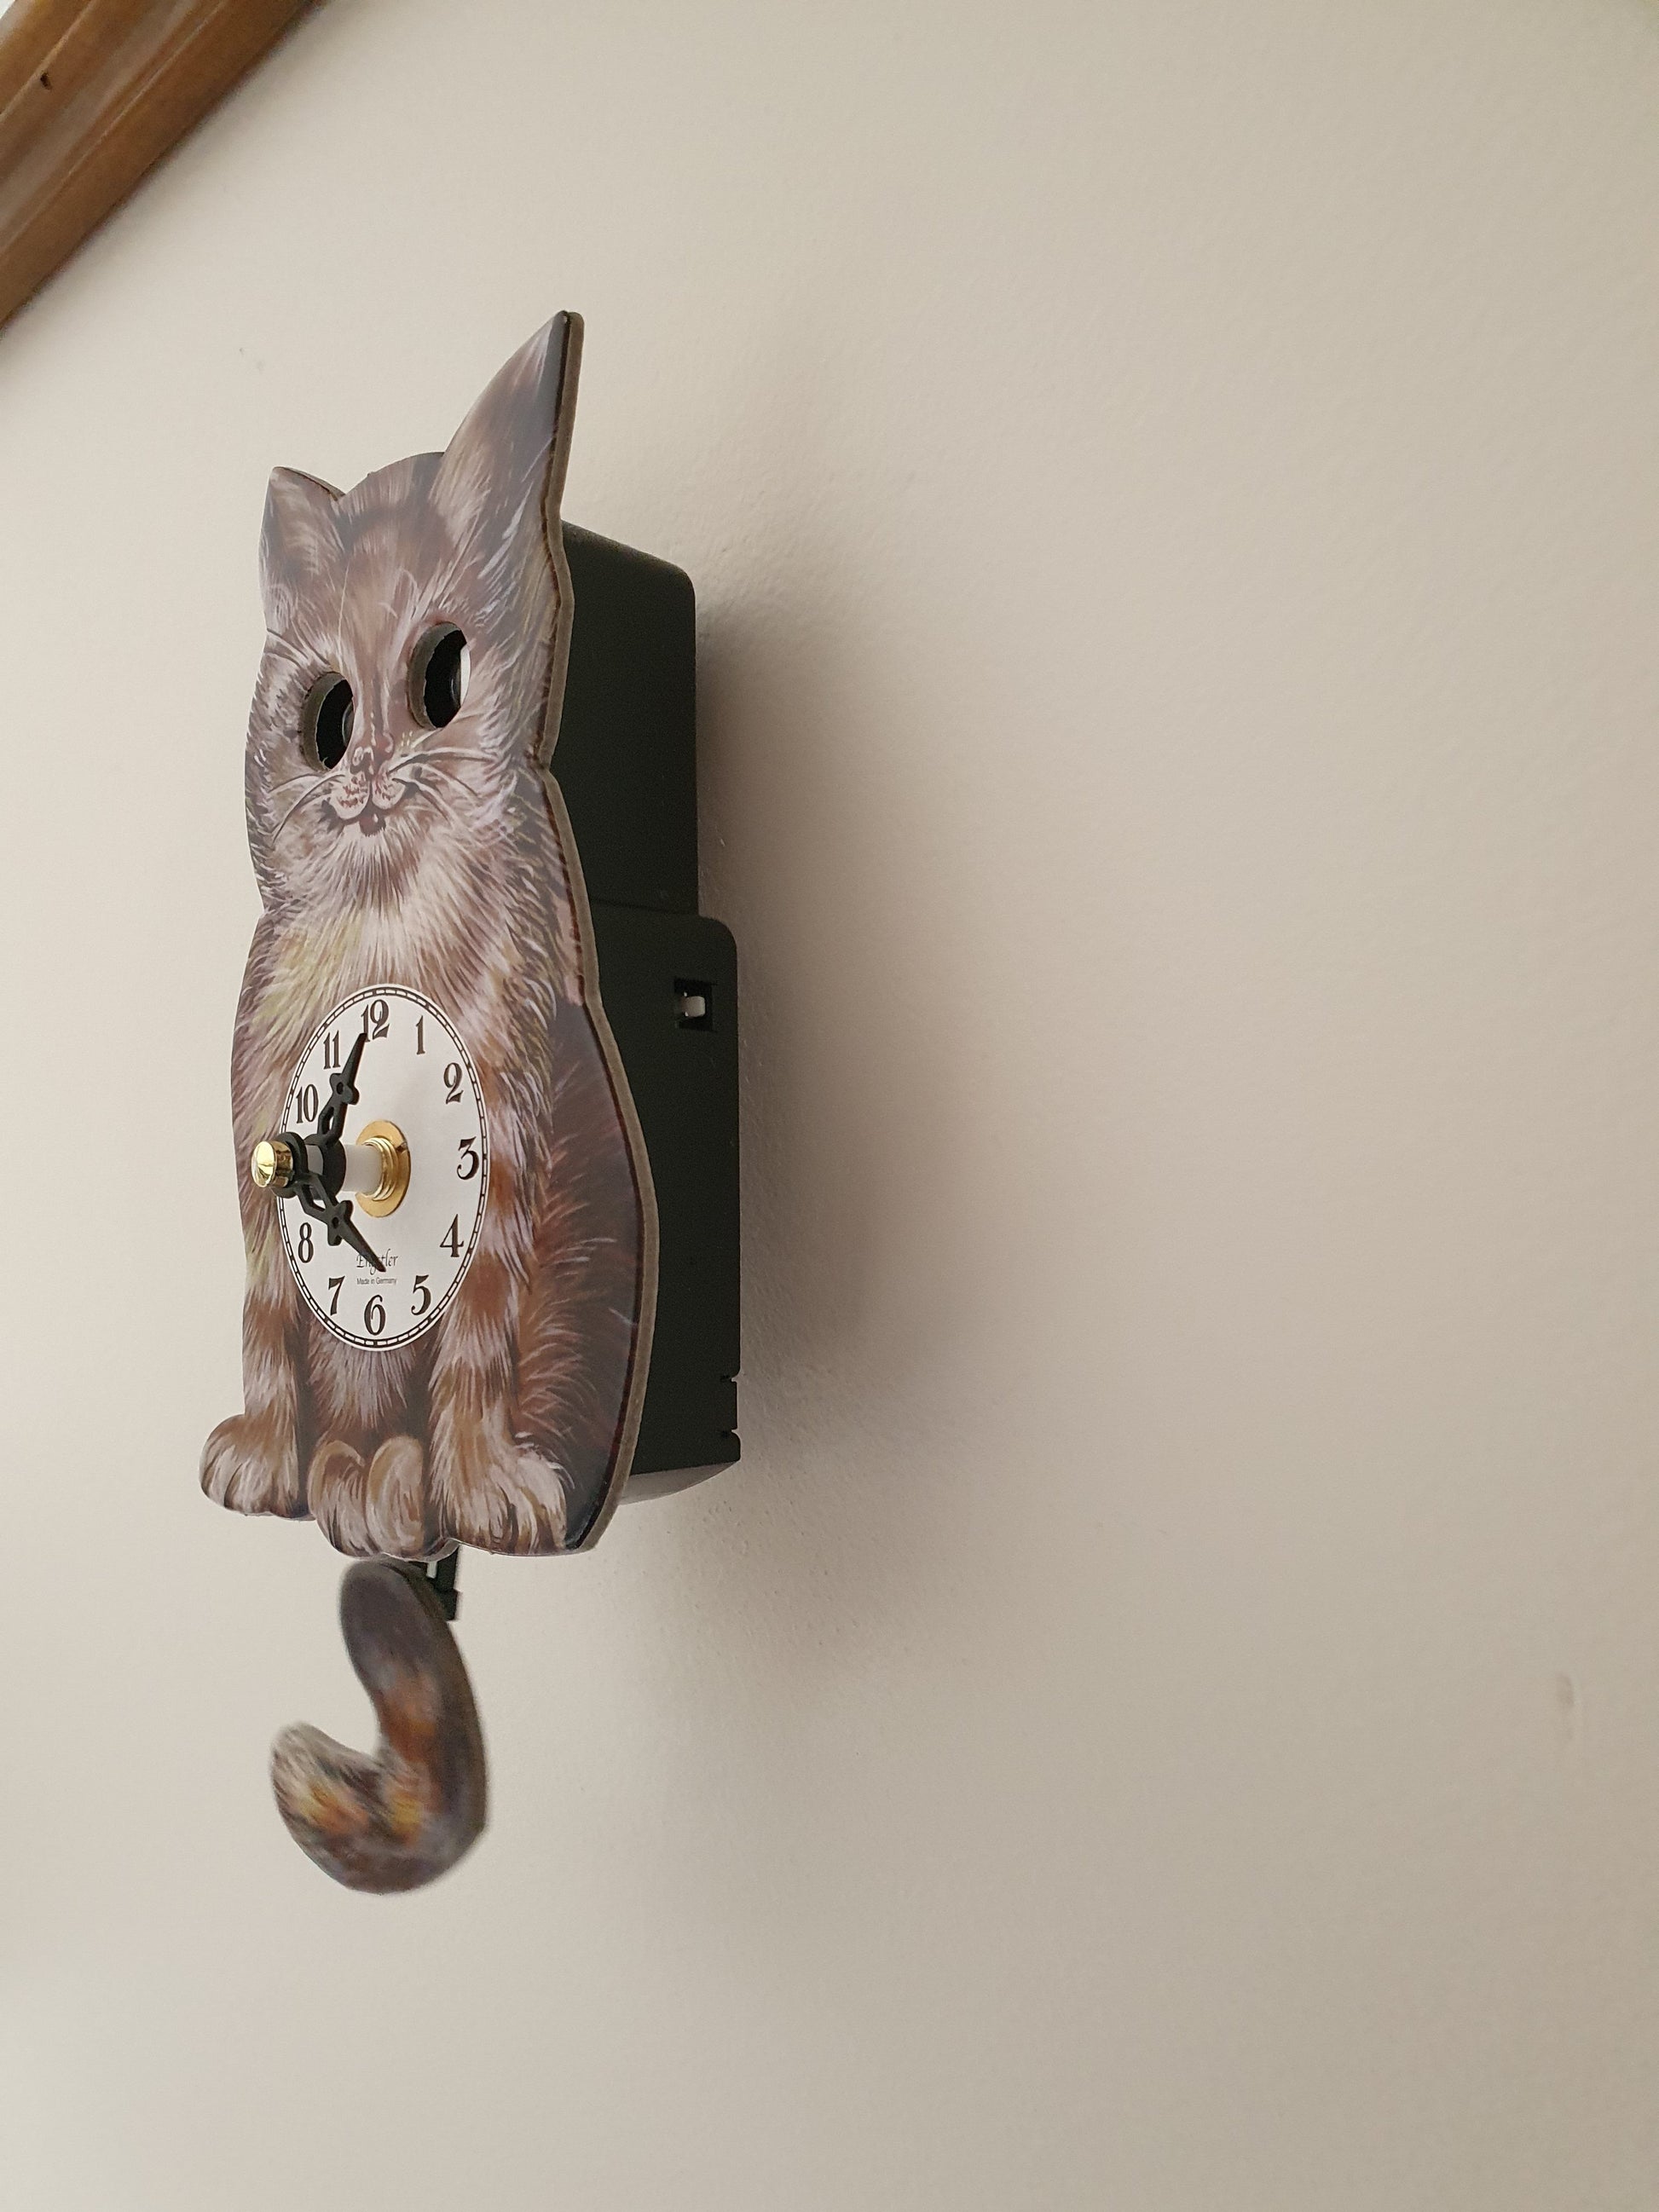 Beautiful Cat Clock With Its Eyes That Move. Made In Germany With Free Shipping Across Australia. Wall Clock [clocktyme.com] 